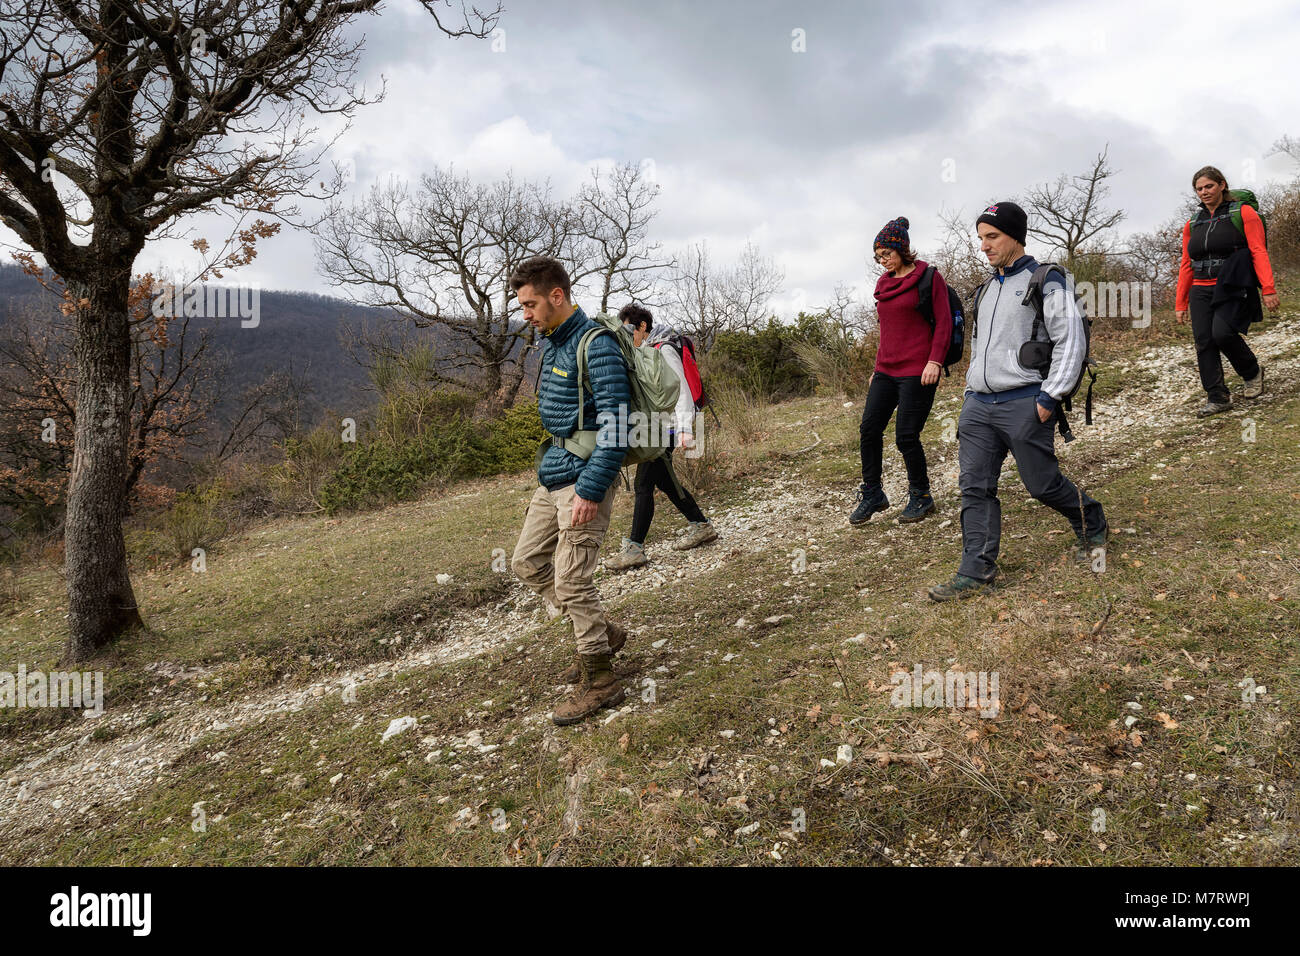 Monte San Giovanni in Sabina, Italy - March 10, 2018: A group of hikers explore mountain paths, among oak and holm oak woods. The scene consists of fi Stock Photo